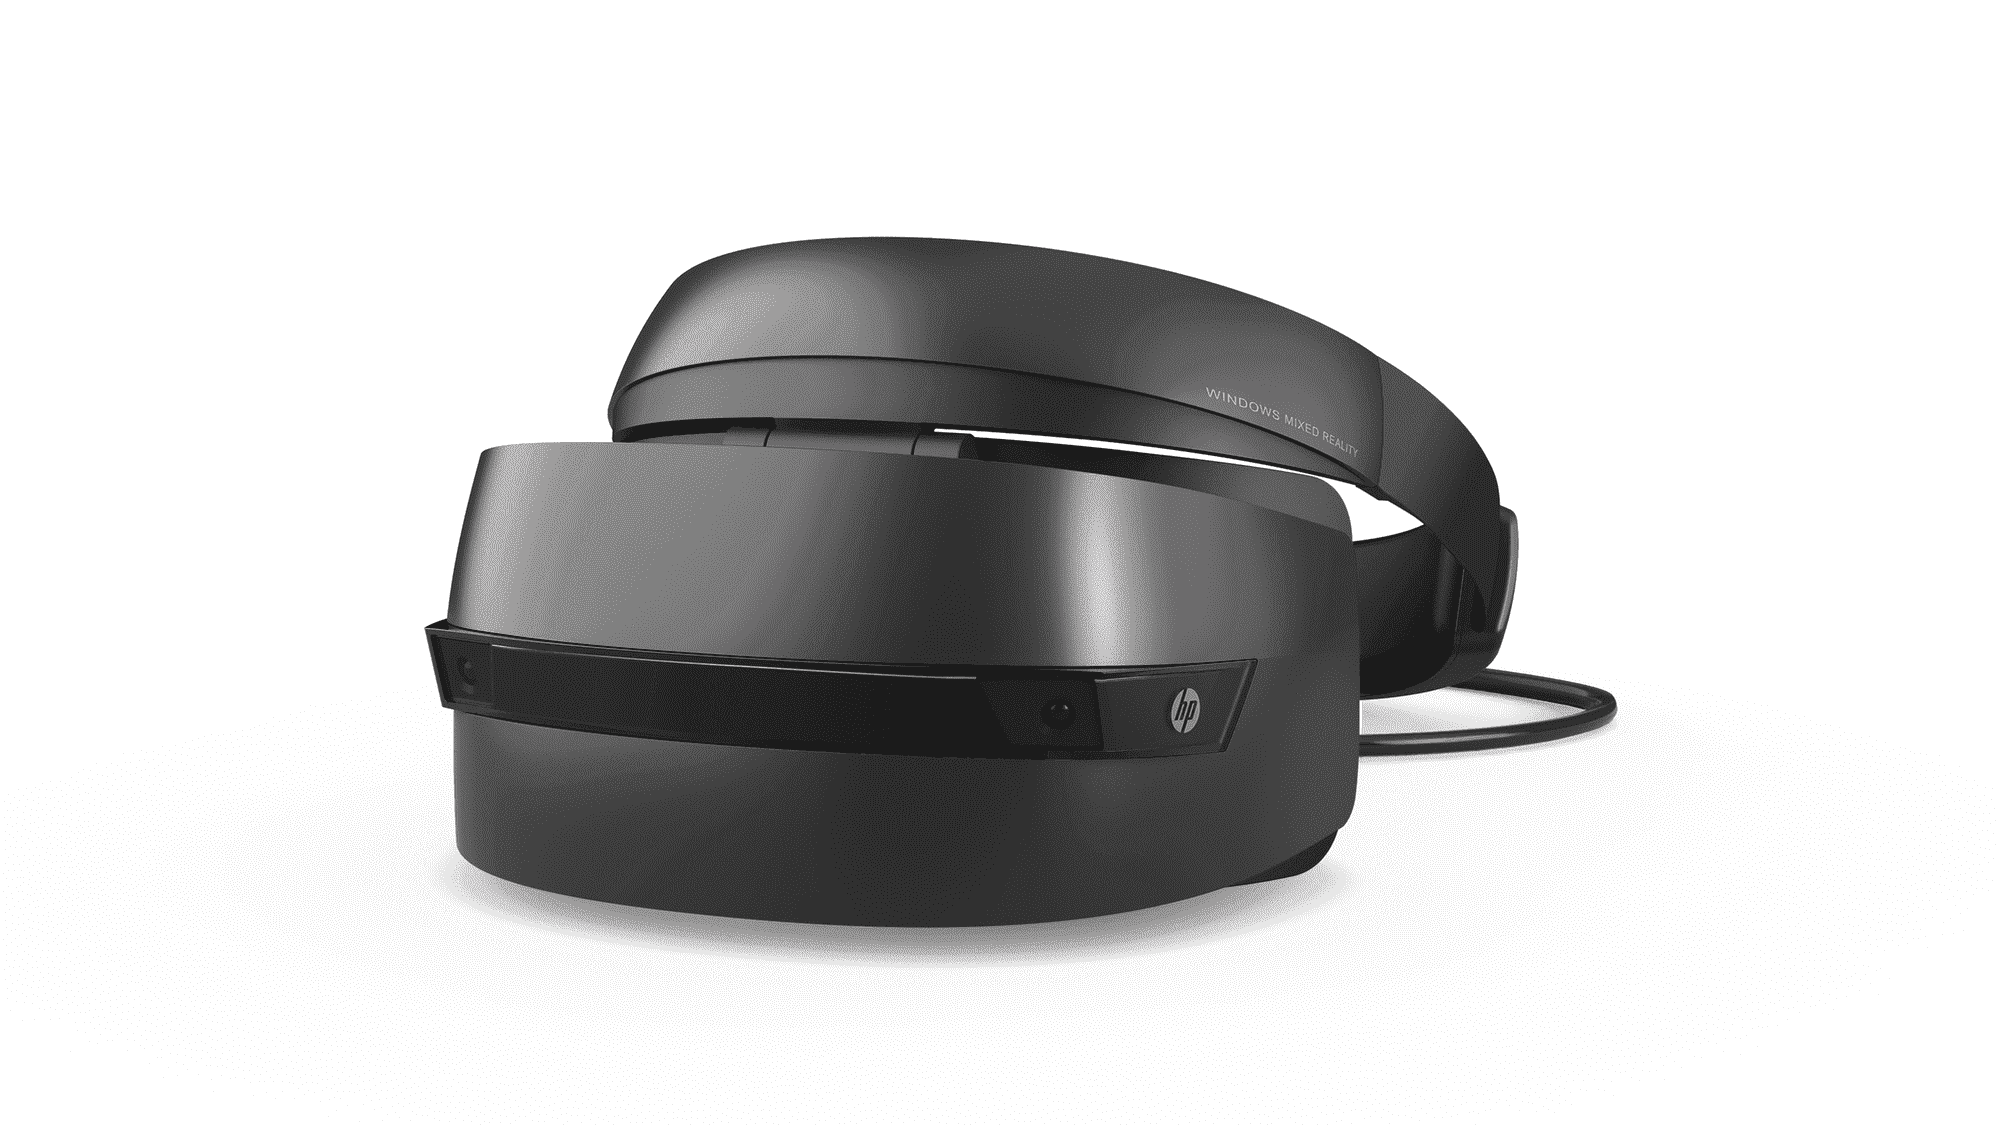 Samsung HMD Odyssey+ is a new Windows Mixed Reality headset d7c3becea8d4fba1dfcc8d661db47f0c.png